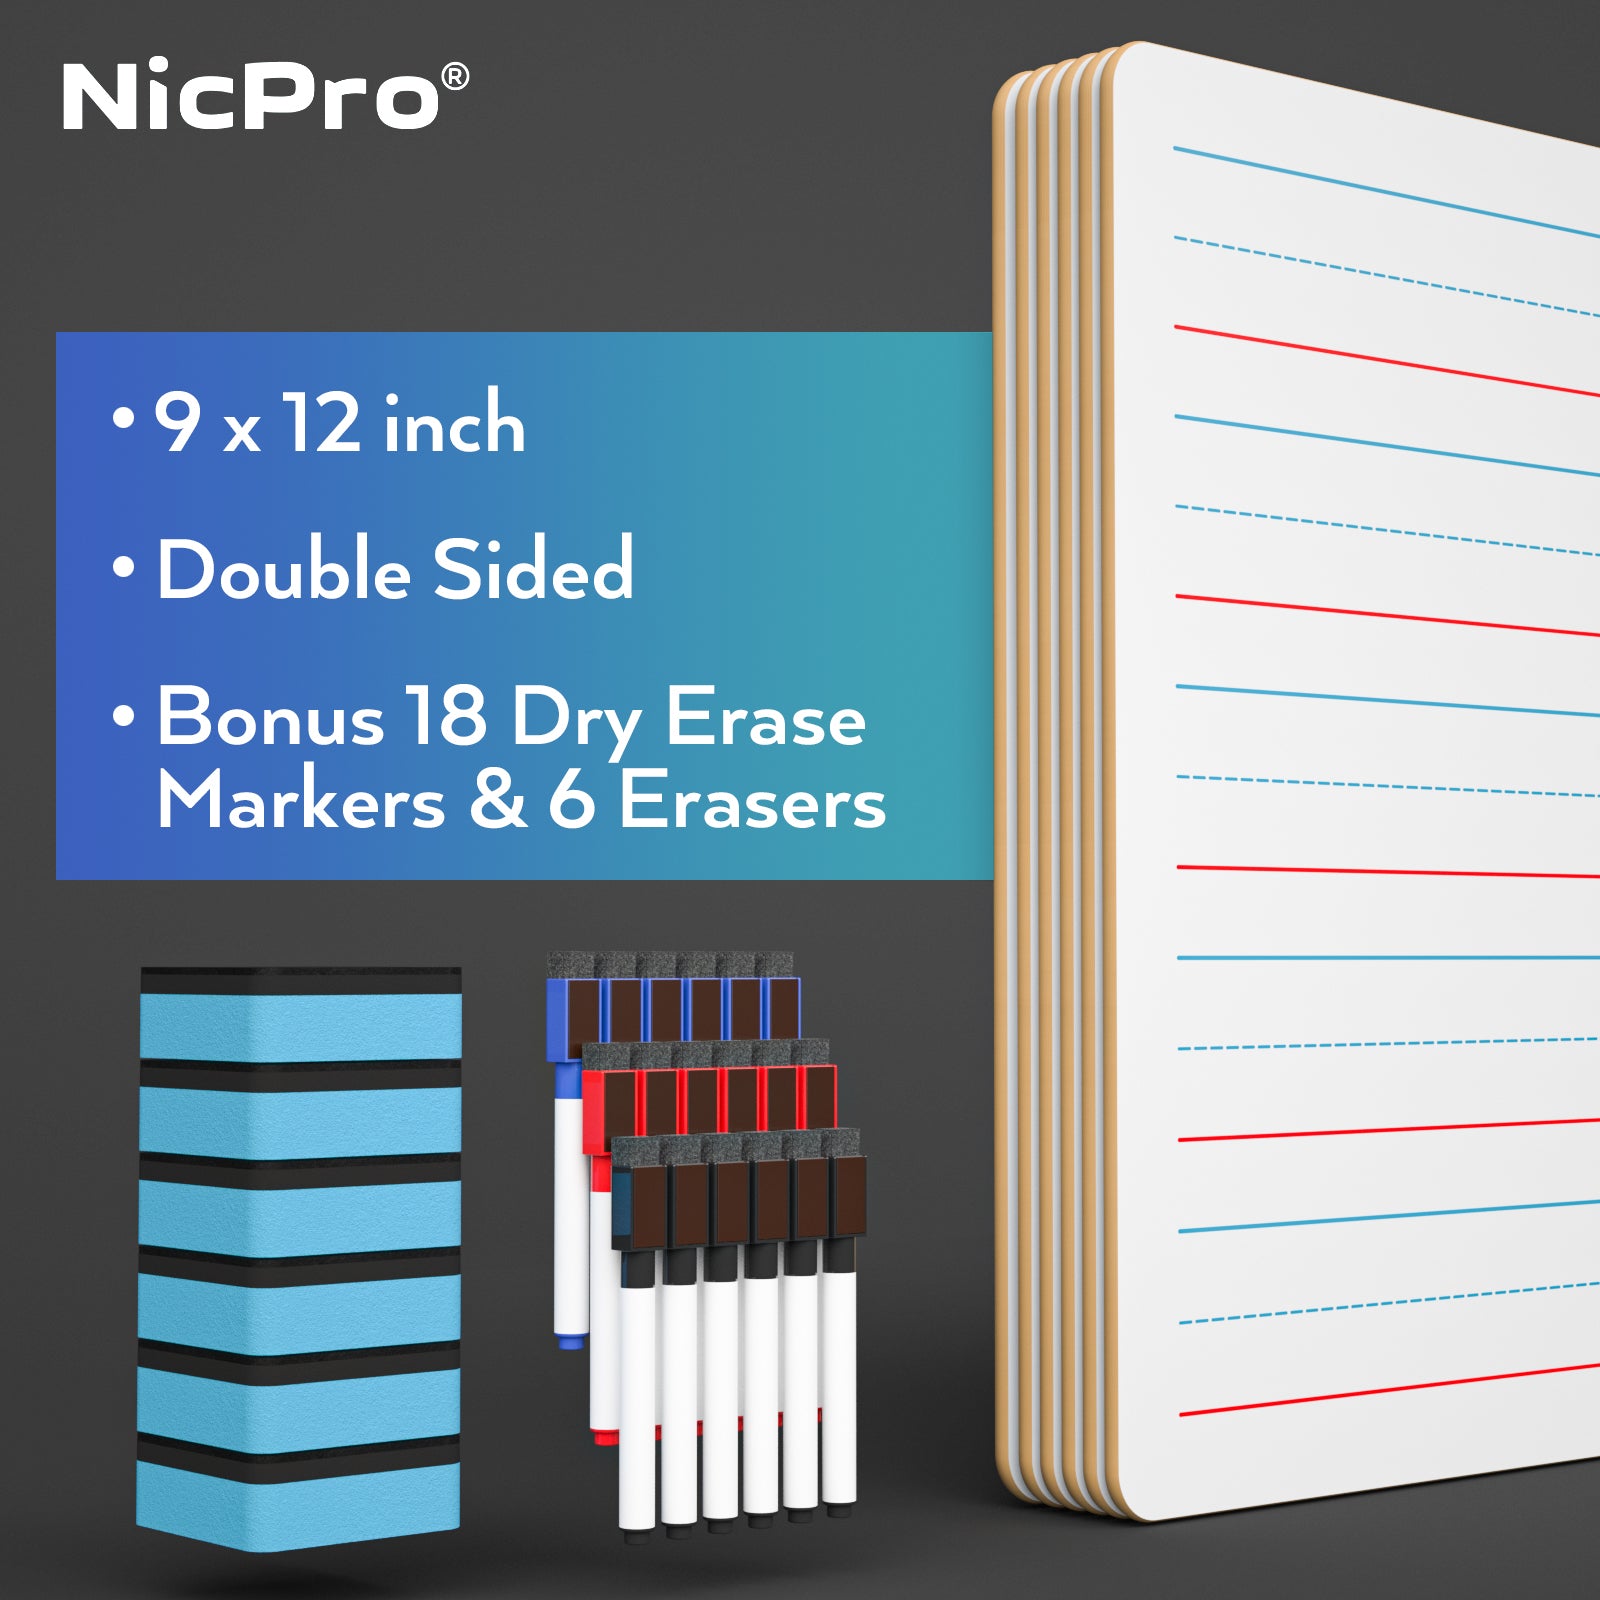 Nicpro 6 Pack Dry Erase Lap Board Set 9 x 12 Inch Double Sided Lined & Blank Lapboard Ruled With 18 Water-based Pens 6 Eraser